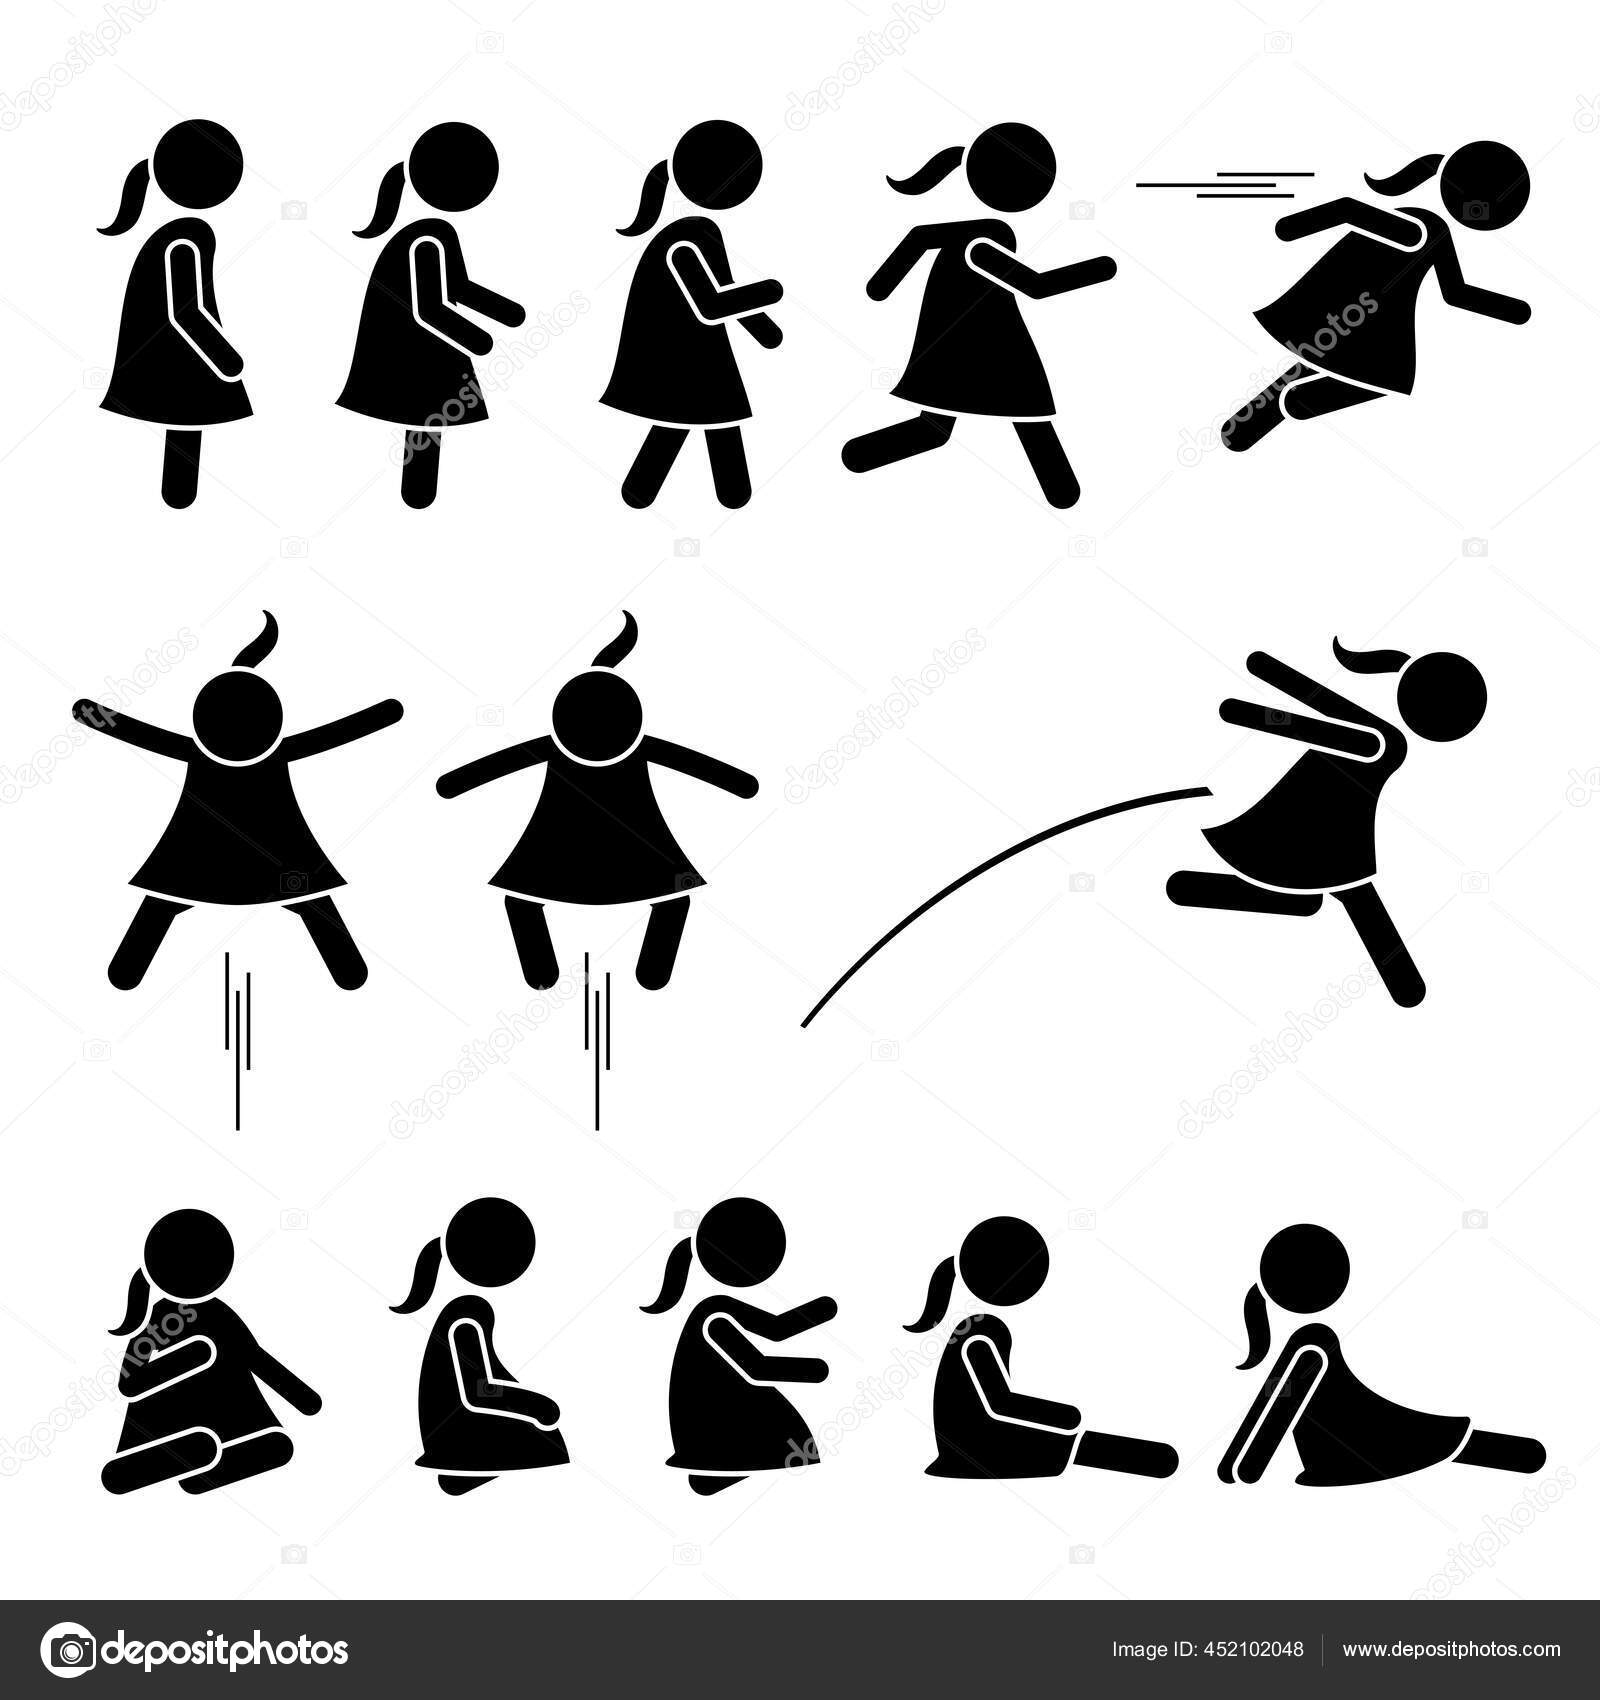 Human Action Poses Postures Stick Figure Pictogram Icons Stock Vector by  ©leremy 62320147